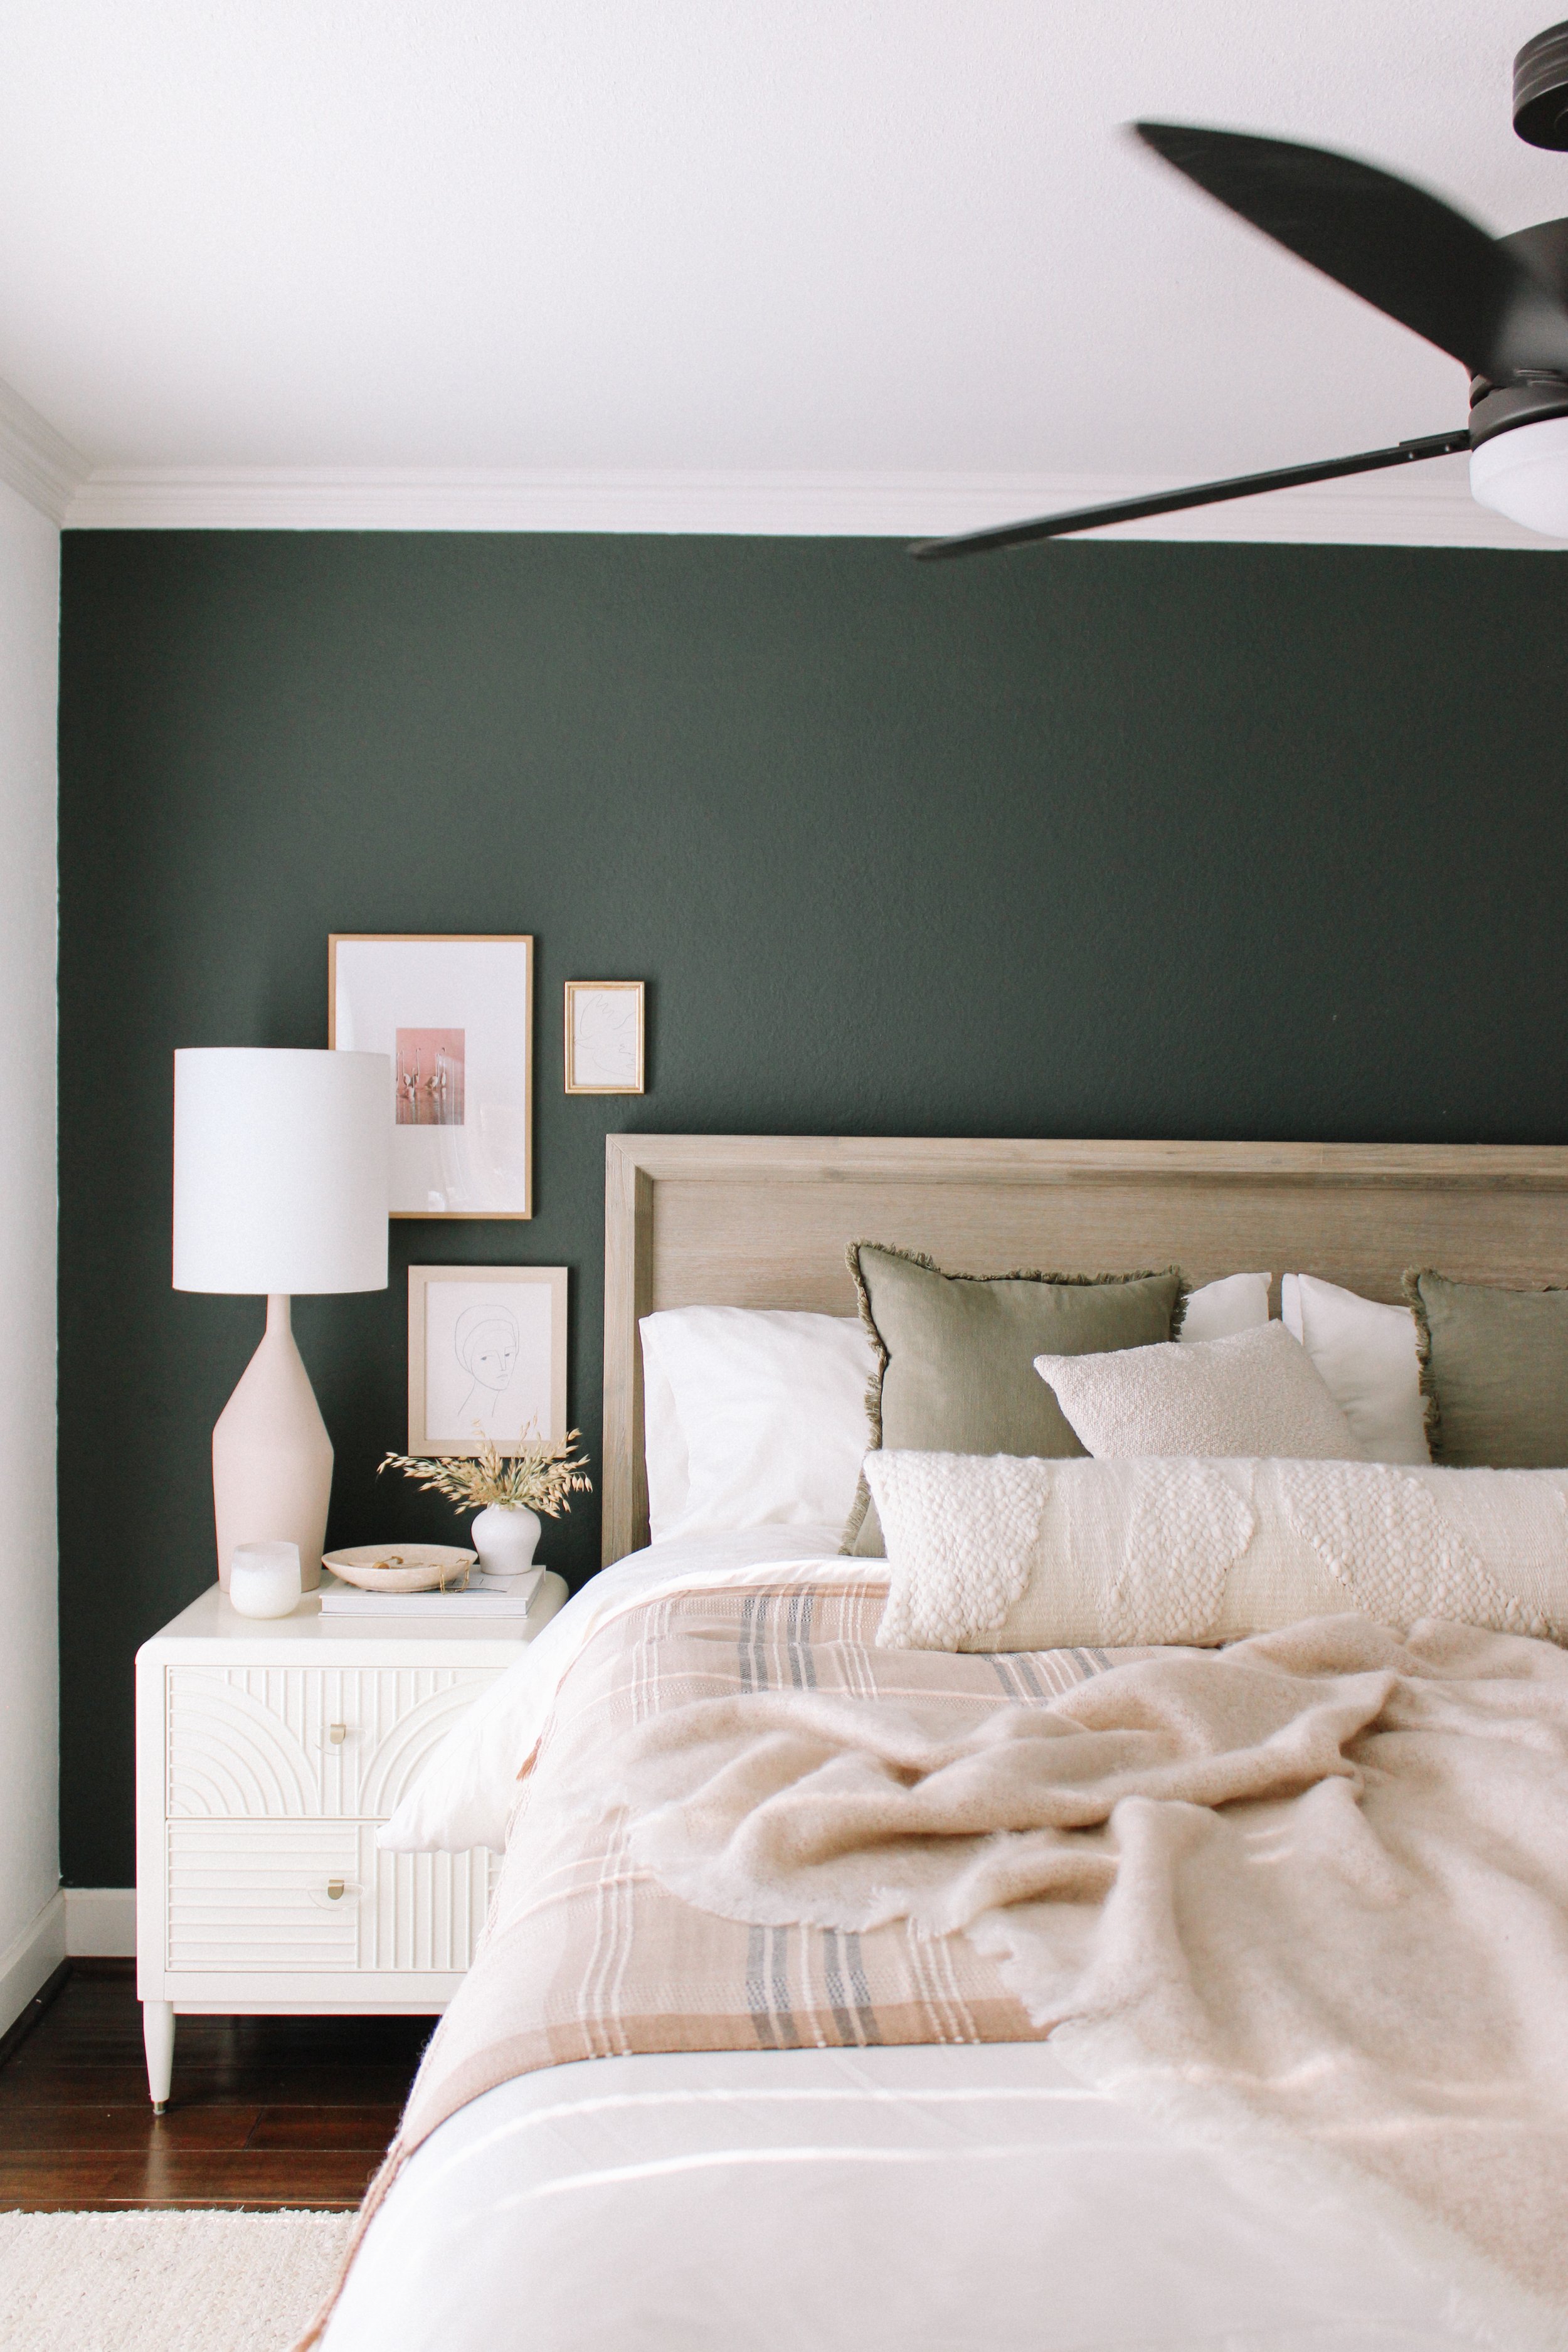 31 Gorgeous Bedroom Decor Ideas For Women You Want To Copy